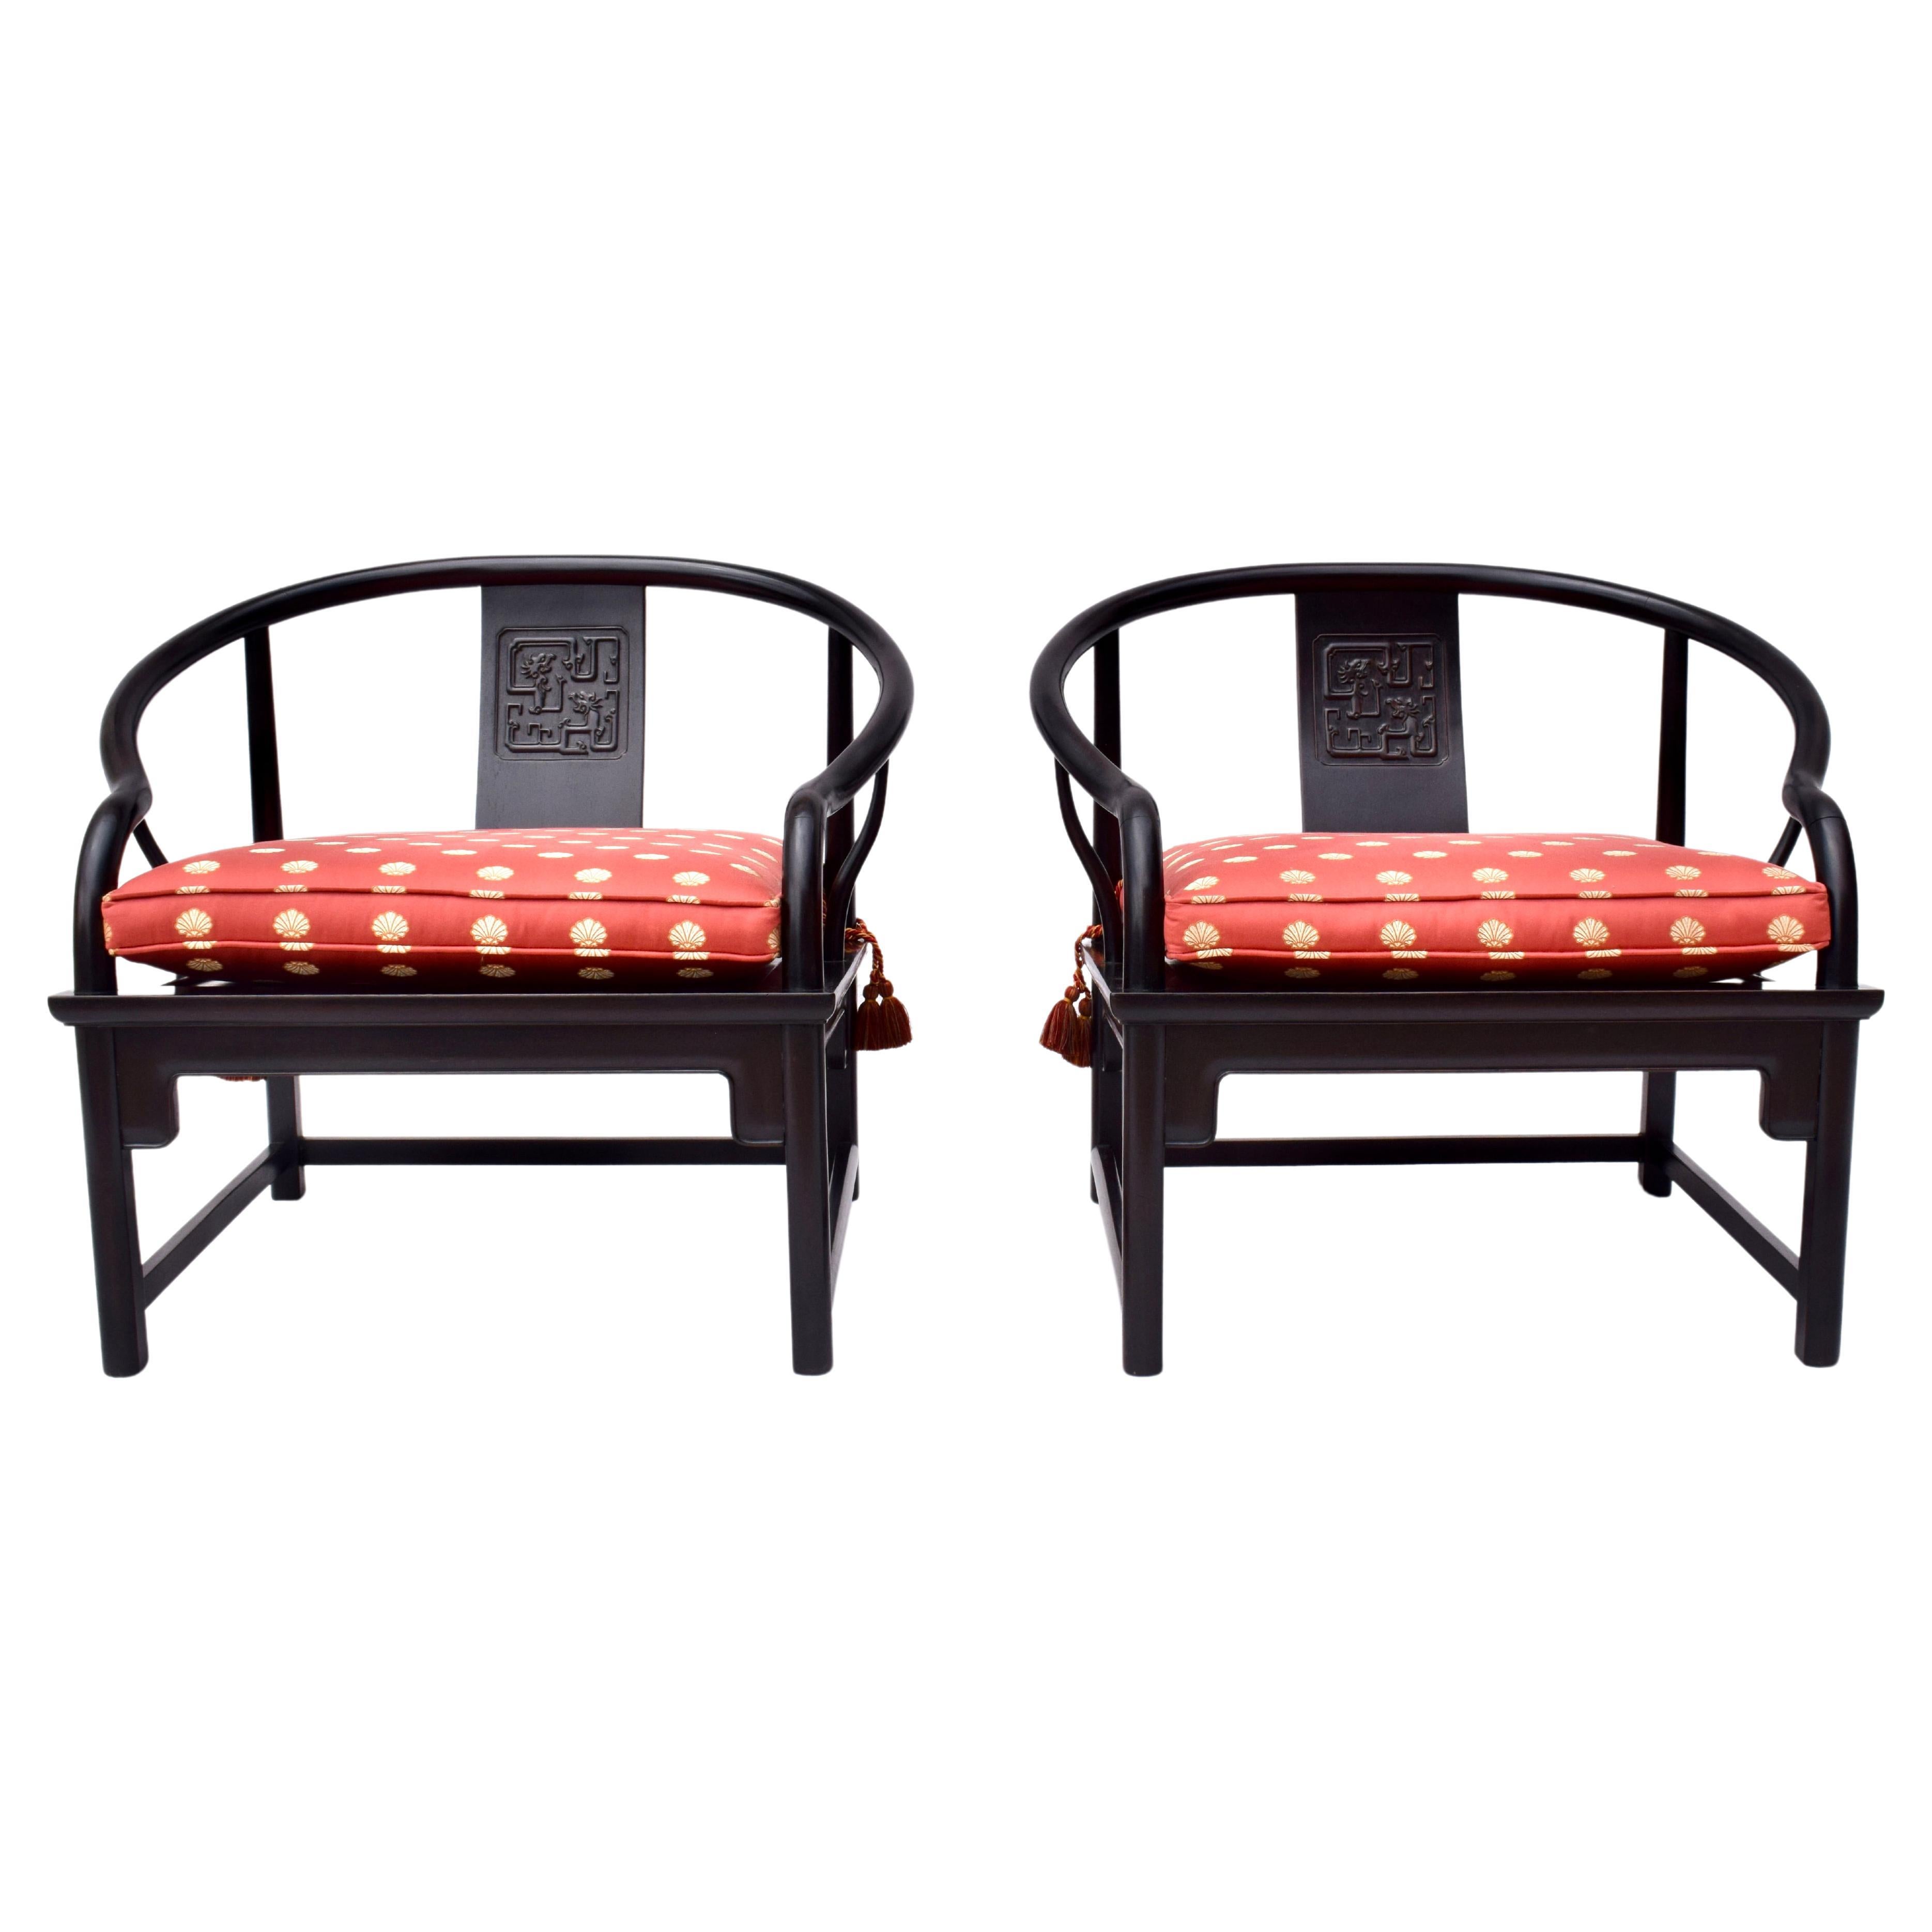 An impressive pair of solid Ebony mid 20th Century Chinoiserie chairs with distinct influences seen in later designs by Michael Taylor for Baker; 1960's. Of heirloom quality possessing a transitional aesthetic, the chairs are suitable for placement